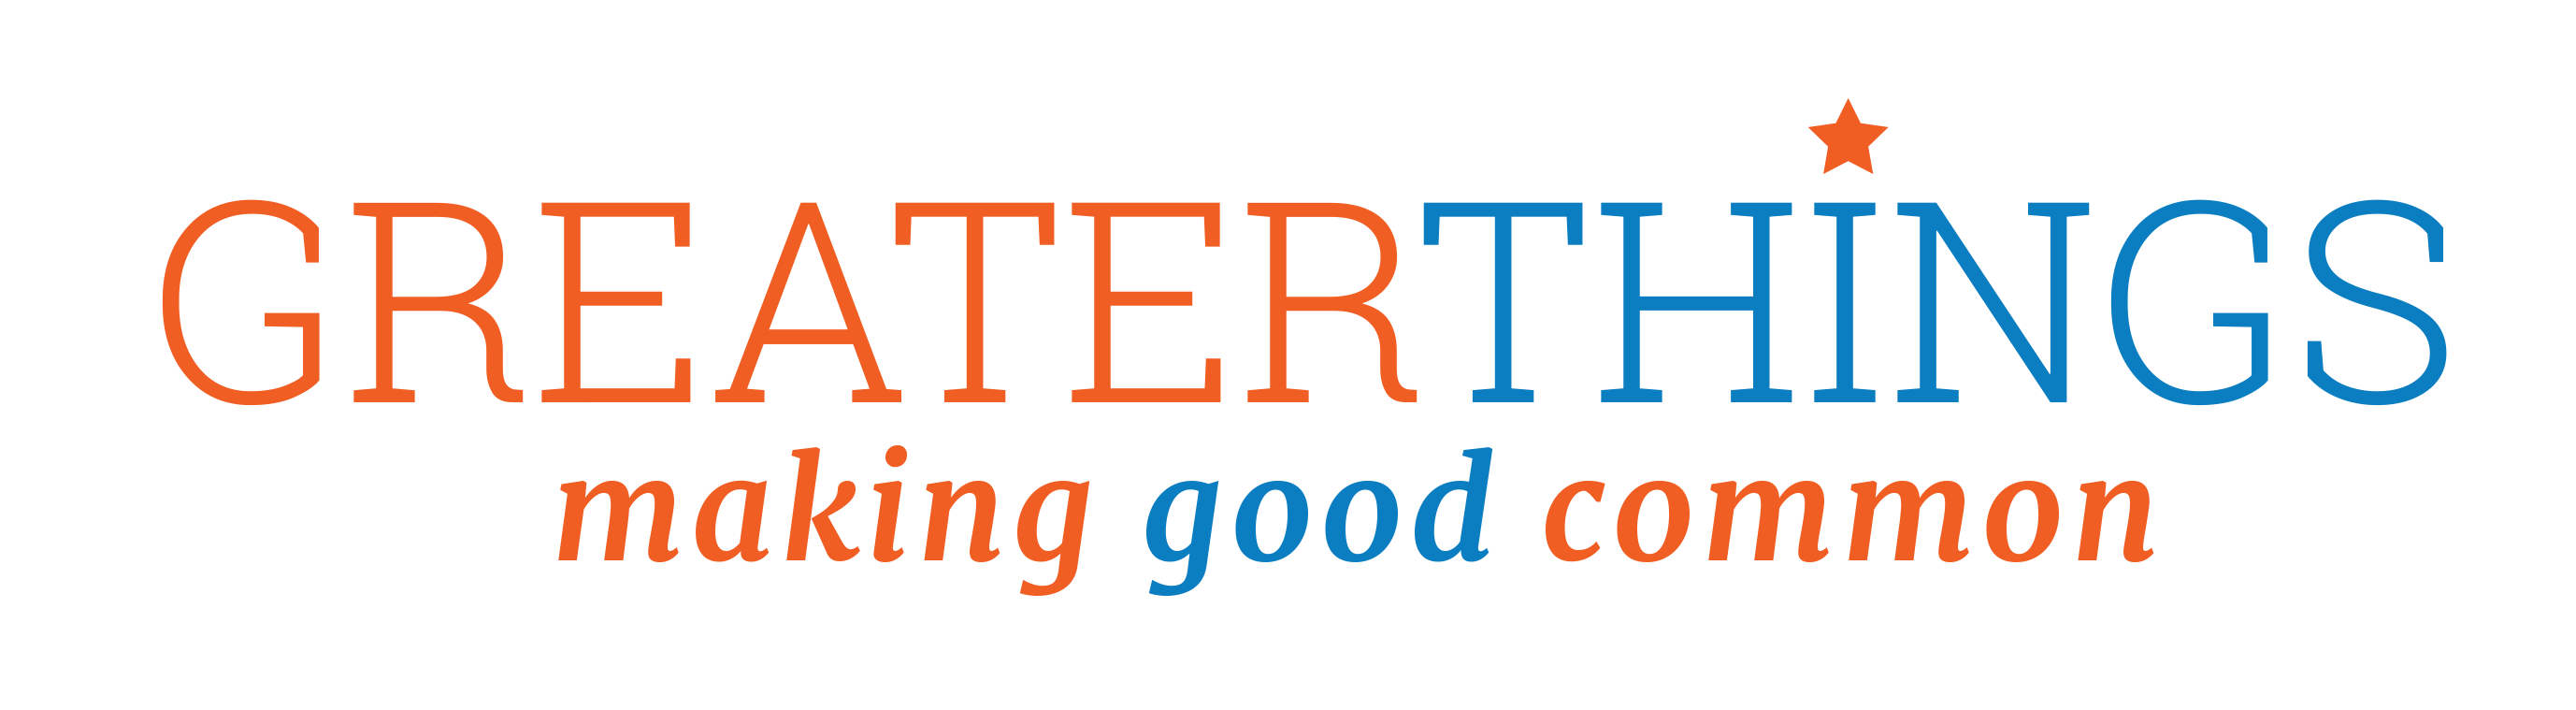 Greater Things logo